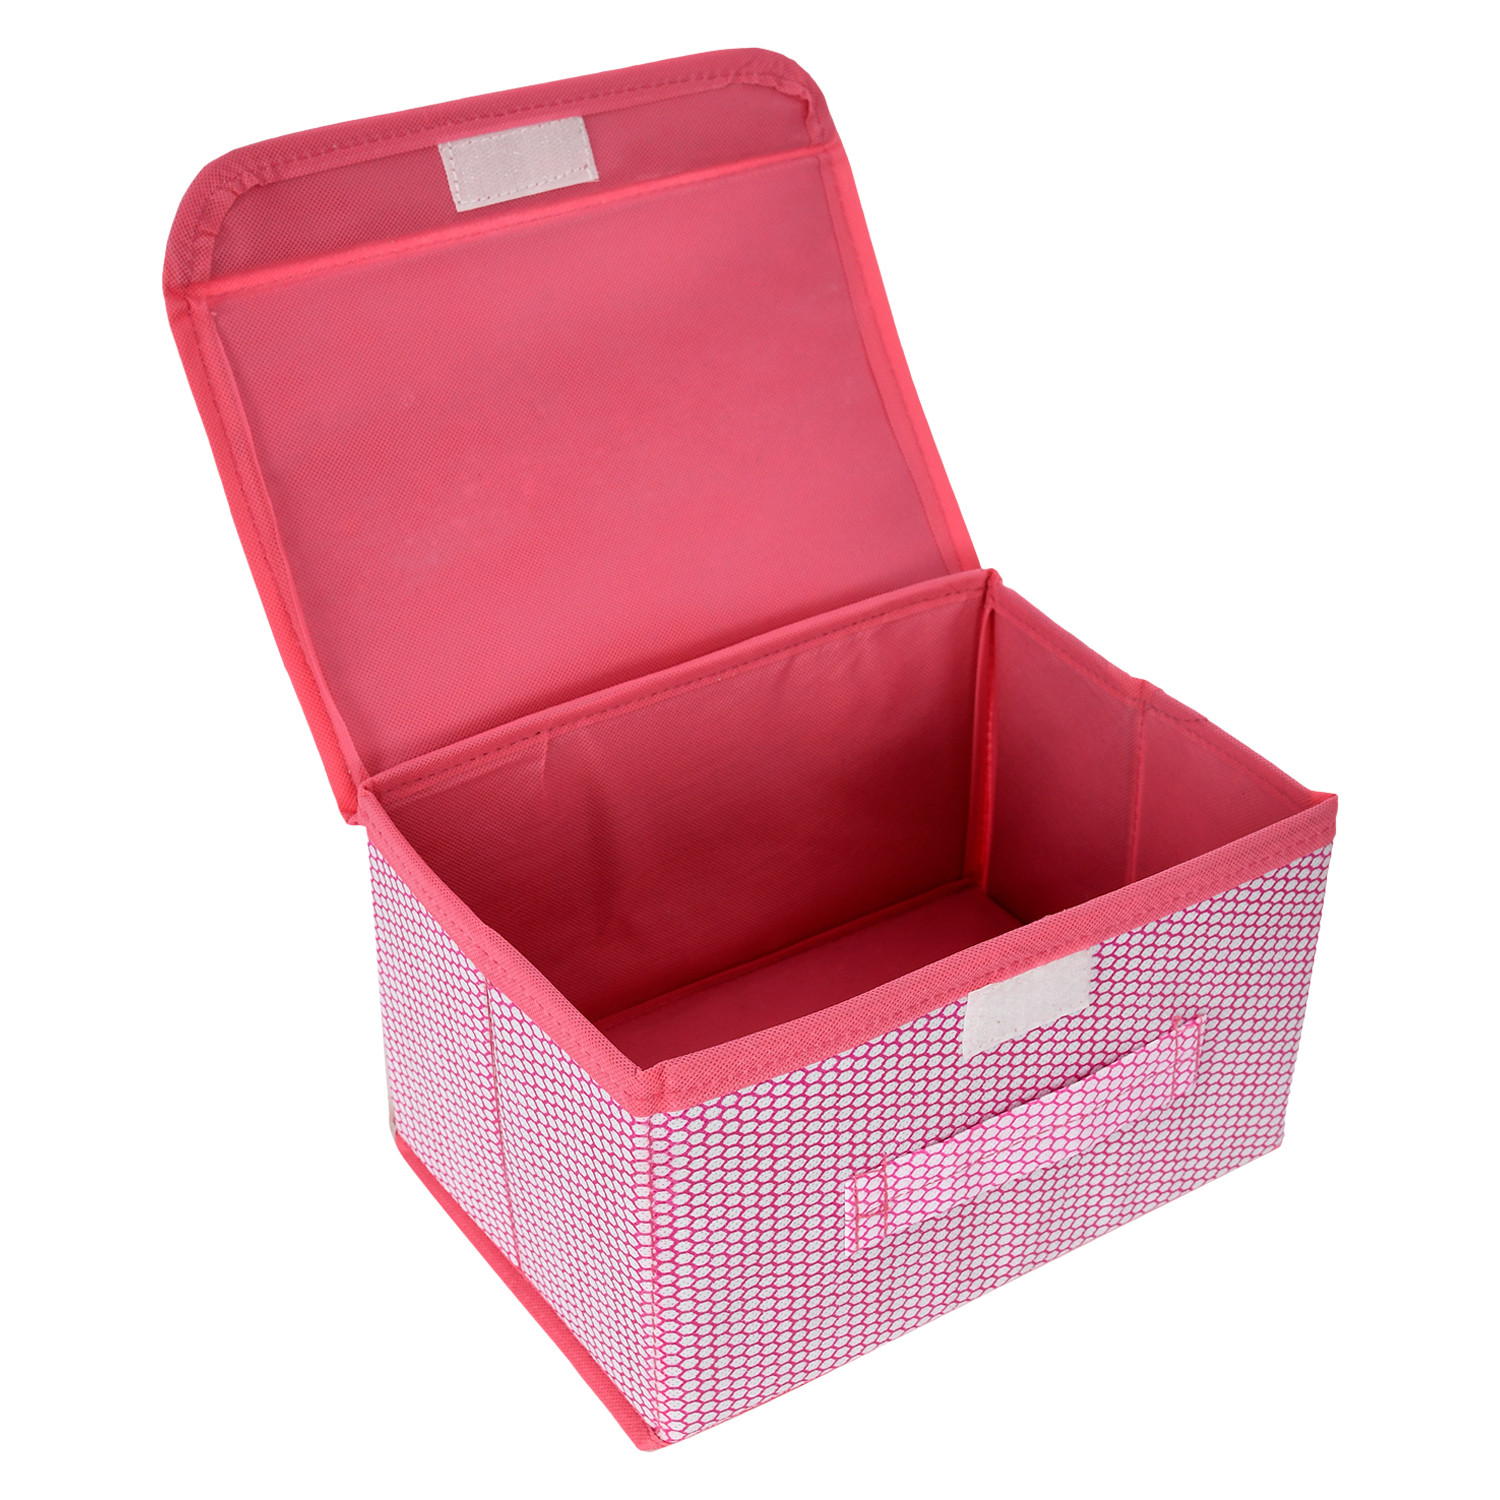 Kuber Industries Drawer Storage Box | Foldable Dhakkan Storage Box | Non-Woven Clothes Organizer For Toys | Storage Box with Handle | Small | Pack of 3 | Green & Pink